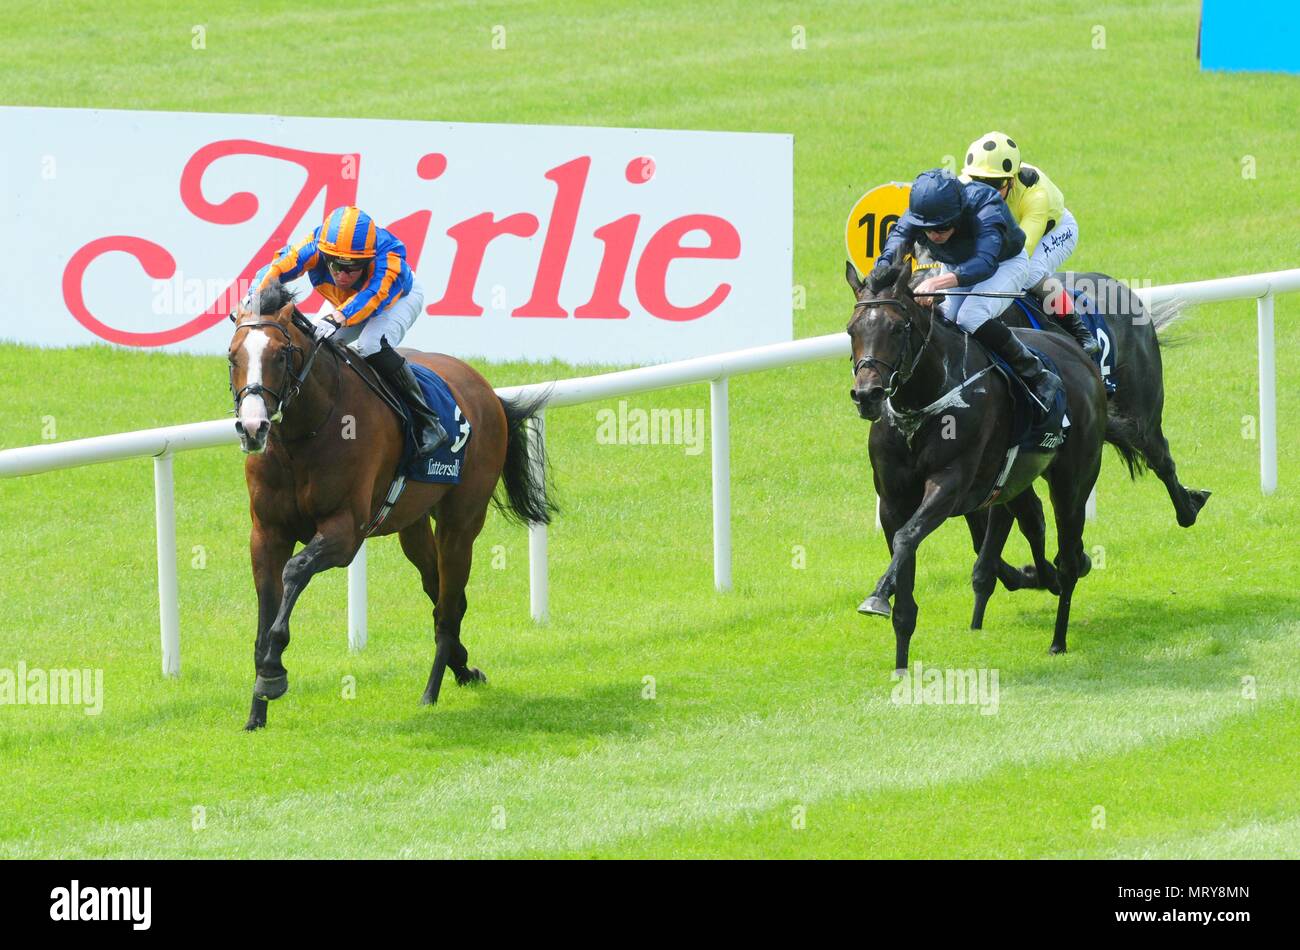 Lancaster Bomber ridden by Seamus Heffernan wins the Tattersalls Gold Cup during day two of the 2018 Tattersalls Irish Guineas Festival at Curragh Racecourse, County Kildare. Stock Photo